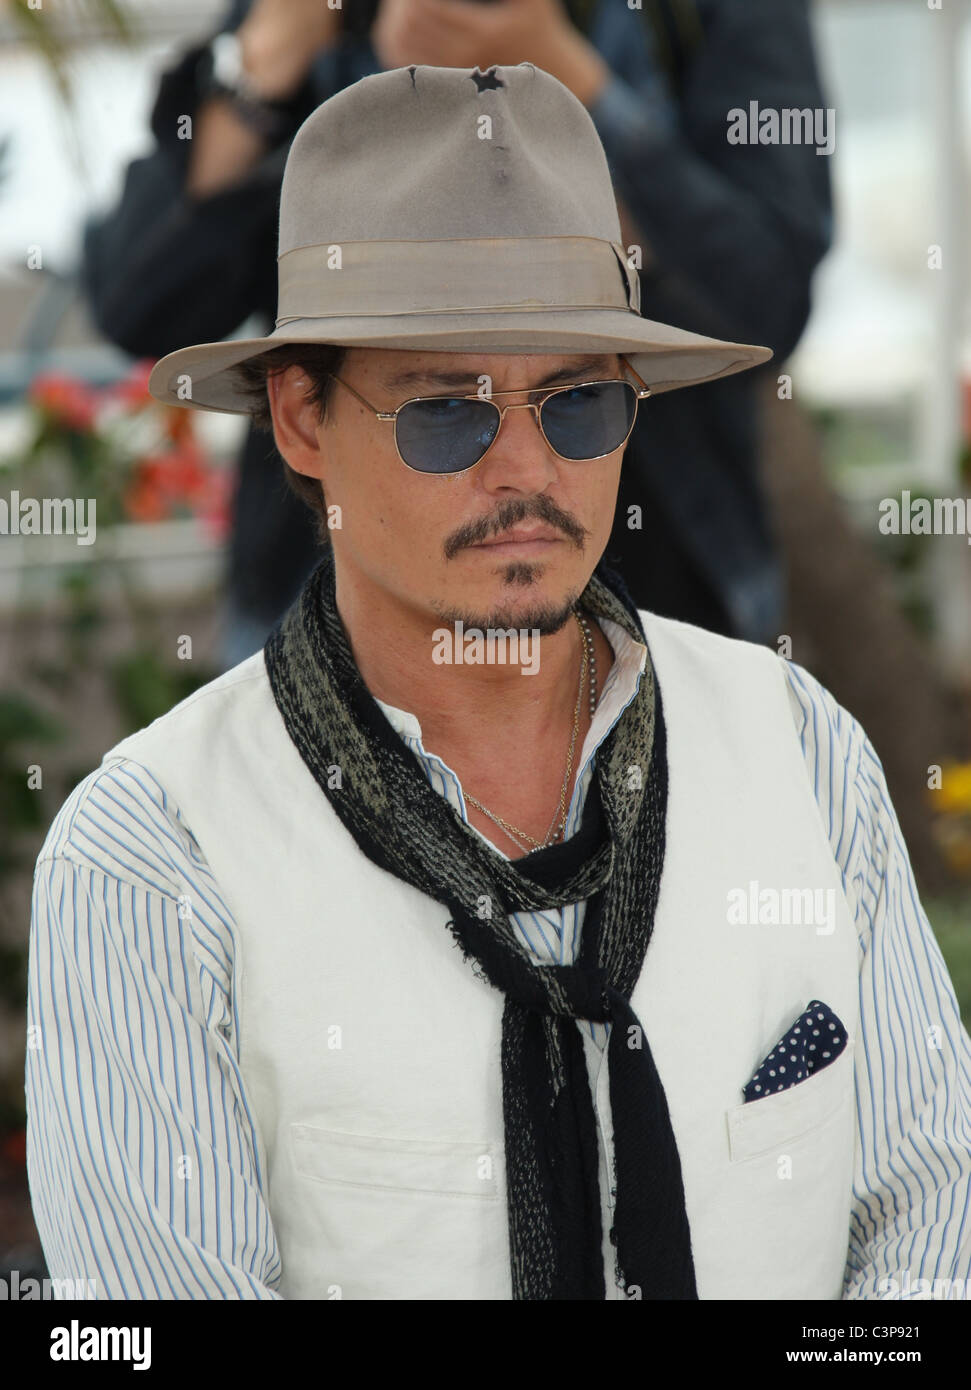 JOHNNY DEPP PIRATES OF THE CARIBBEAN: ON STRANGER TIDES PHOTOCALL CANNES FILM FESTIVAL 2011 PALAIS DES FESTIVAL CANNES FRANCE Stock Photo